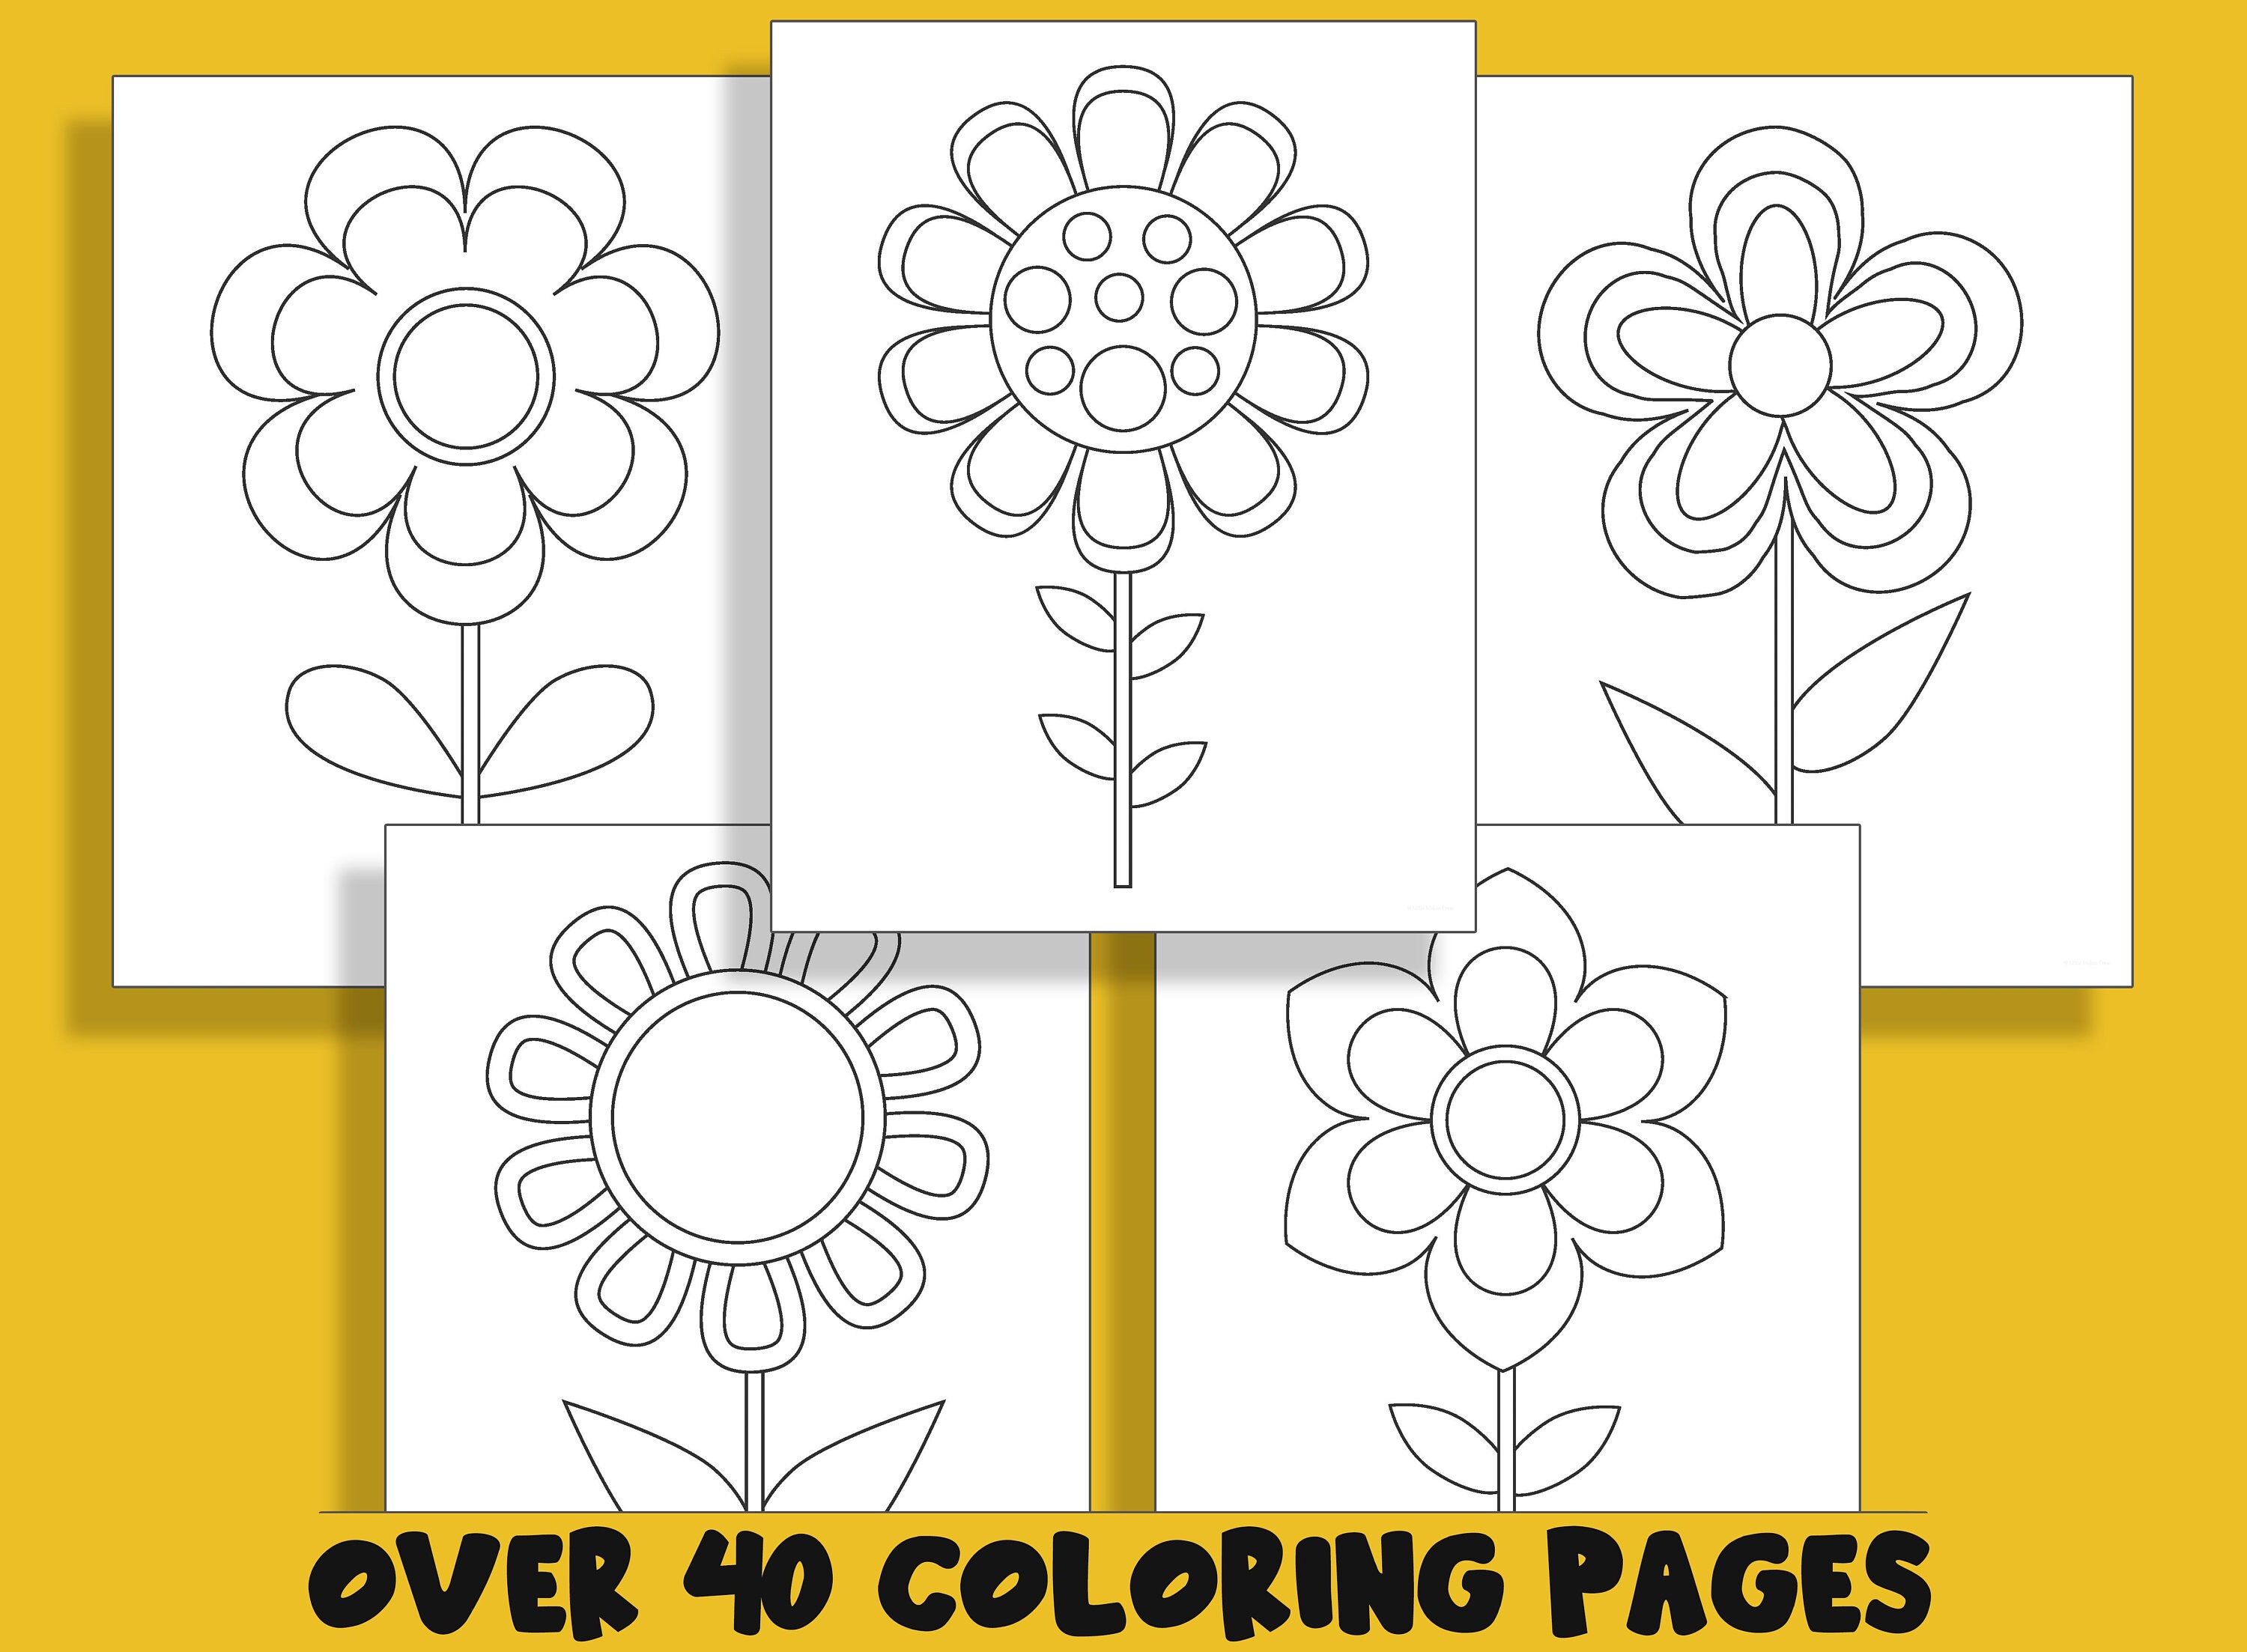 Spring flowers coloring book printable coloring pages for kids a fun way for kids of all ages to develop creativity focus motor skills